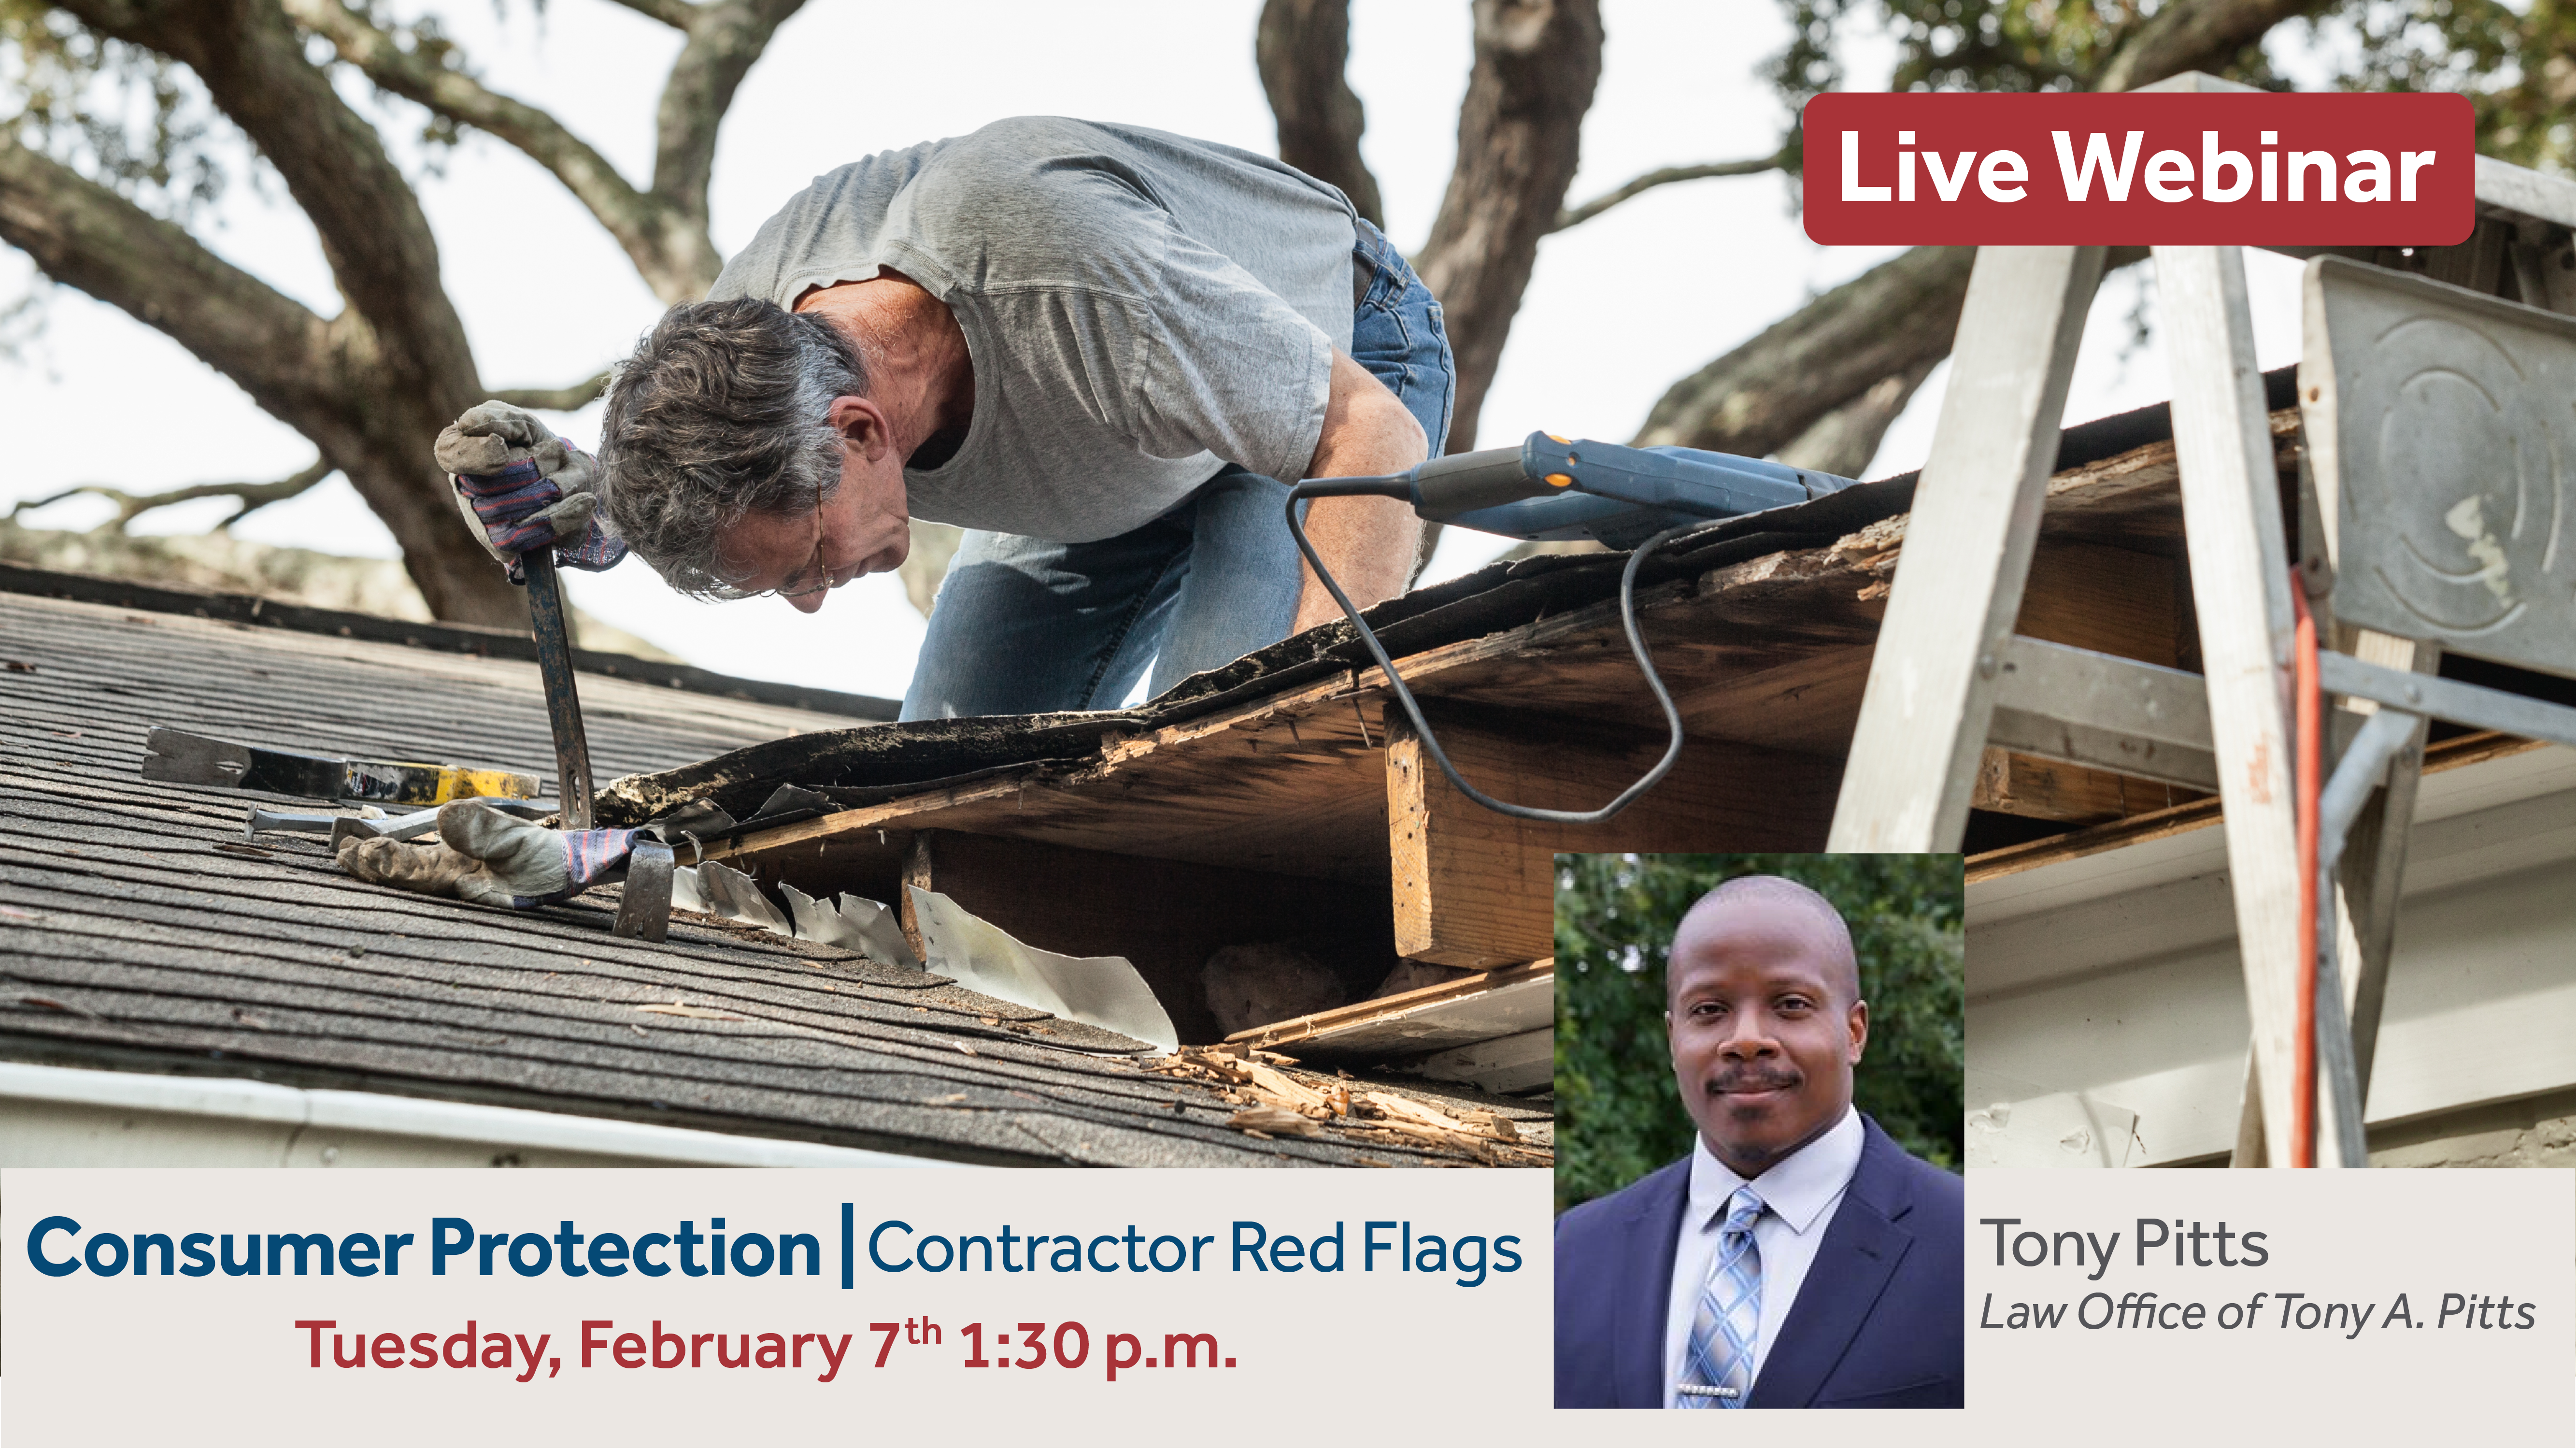 Home Contractor Red Flags | Consumer Protection Live Webinar on Tuesday, February 7th at 1:30 p.m. | Attorney Tony Pitts